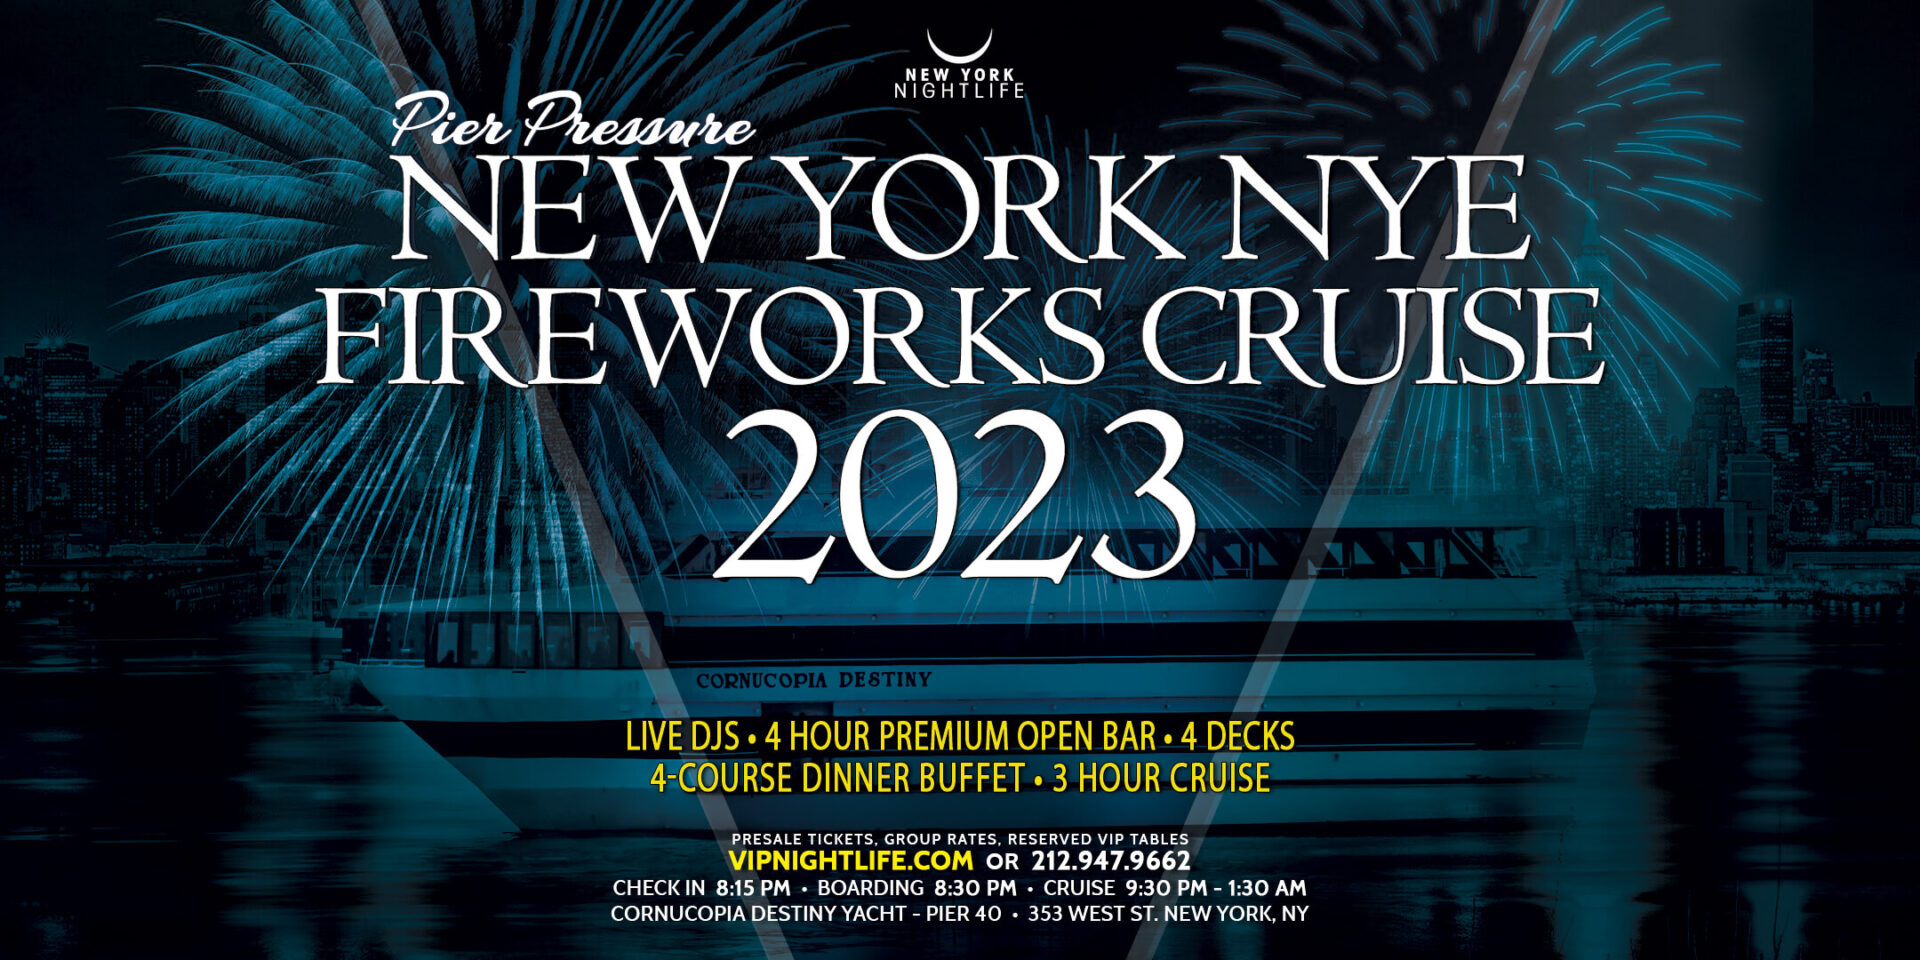 New York New Year’s Eve Fireworks Party Cruise 2023 – New York